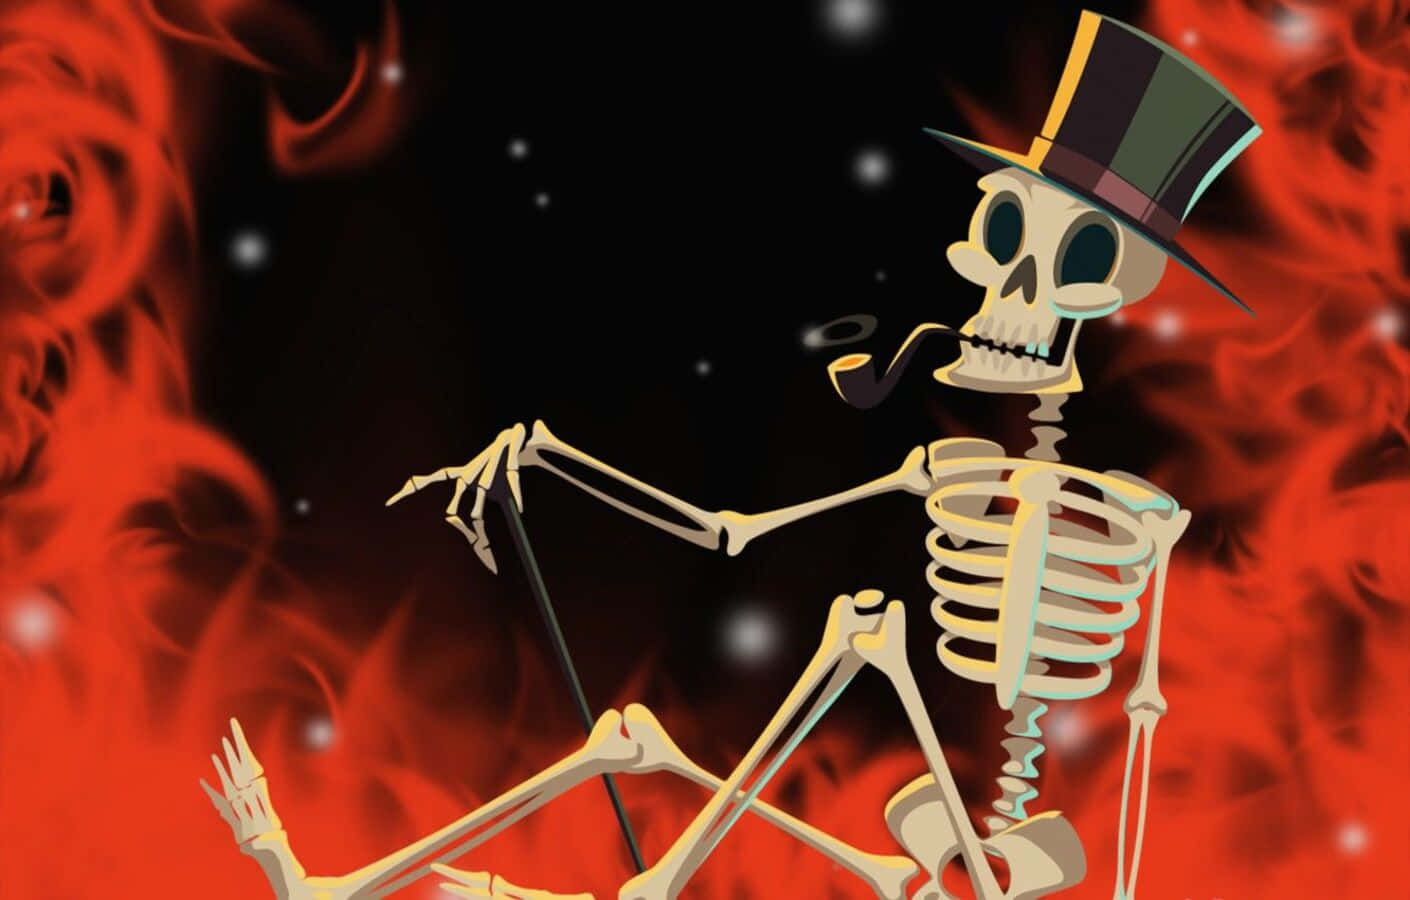 Chilling Halloween Skeleton with Creepy Grin Wallpaper